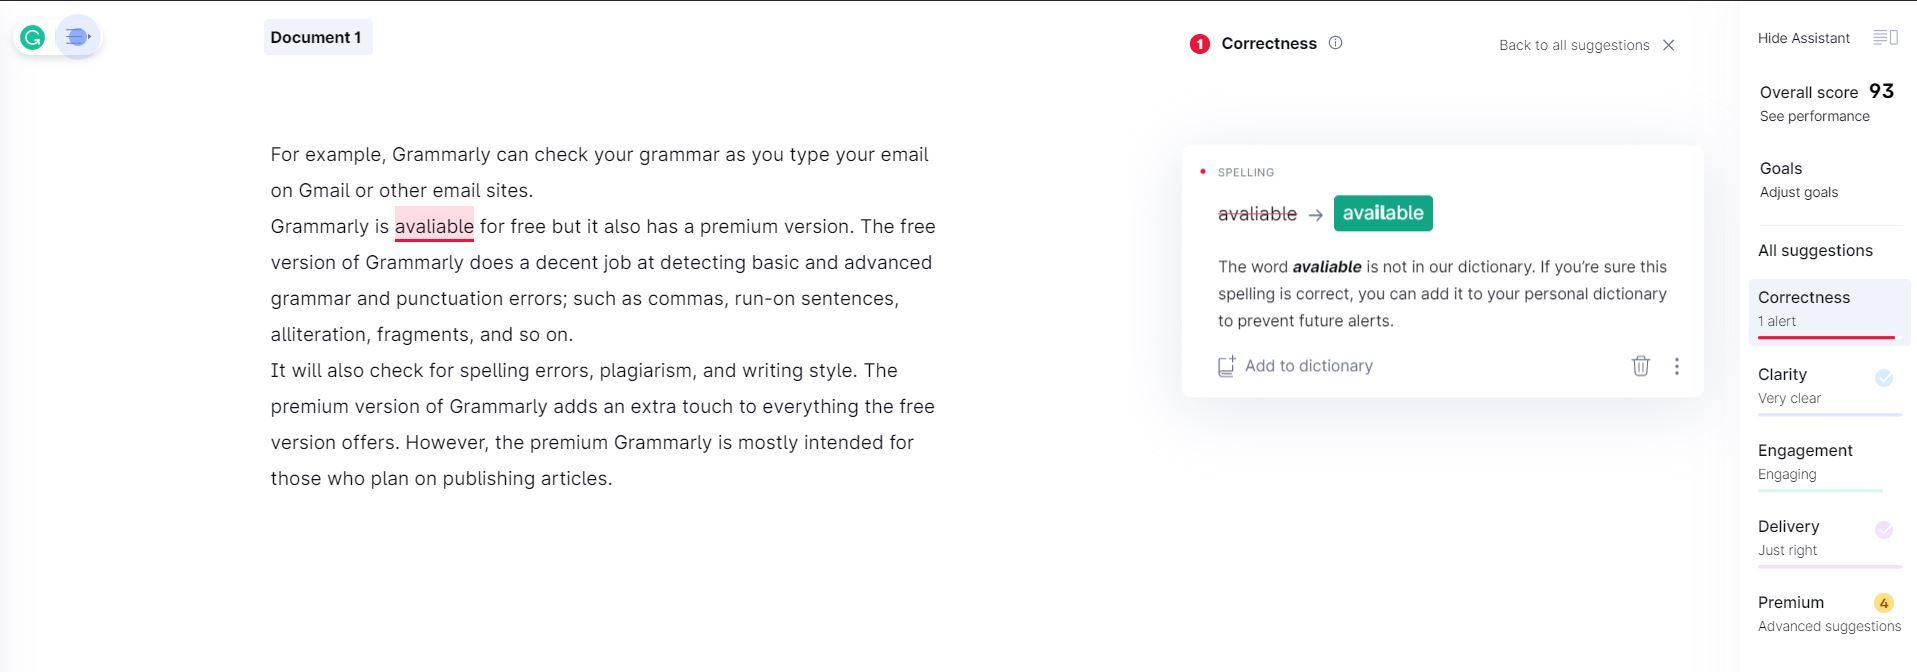 grammarly example